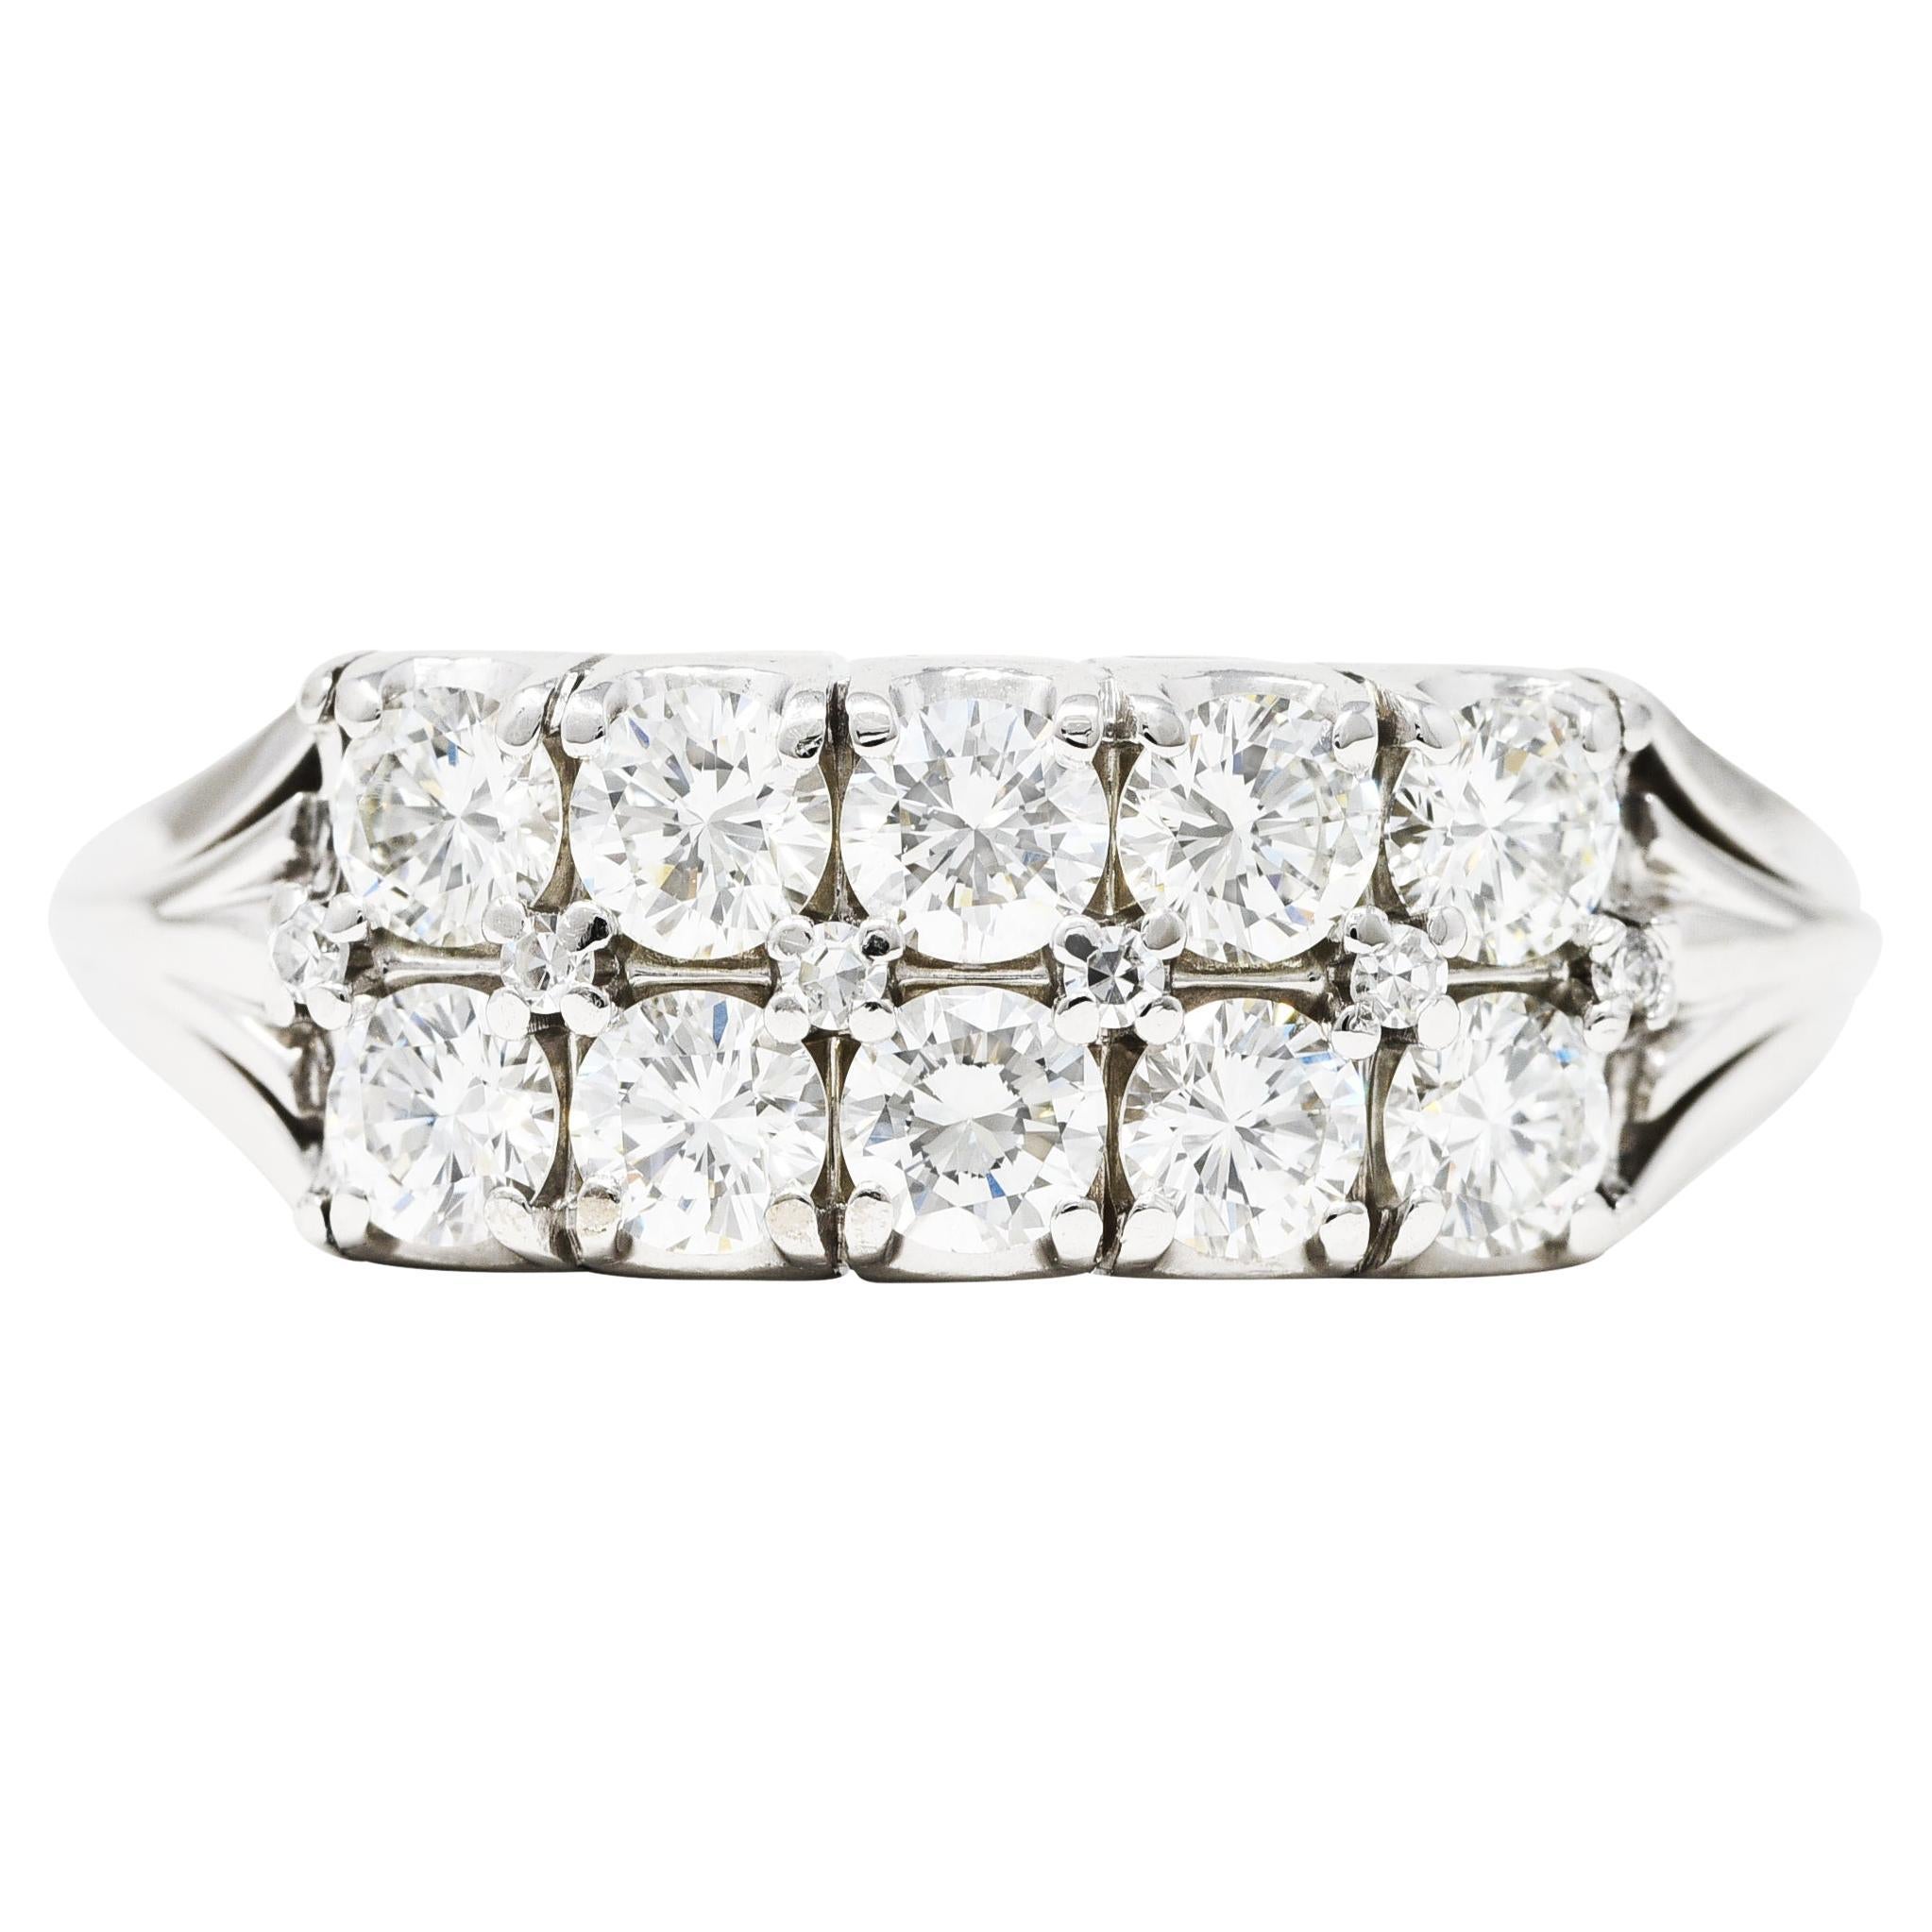 Band ring is designed as two rows of round brilliant cut diamonds. Weighing in total approximately. 1.00 carat - G/H color with overall VS clarity. Basket set East to West and completed by stylized pierced shoulders. Stamped 18K for 18 karat gold.